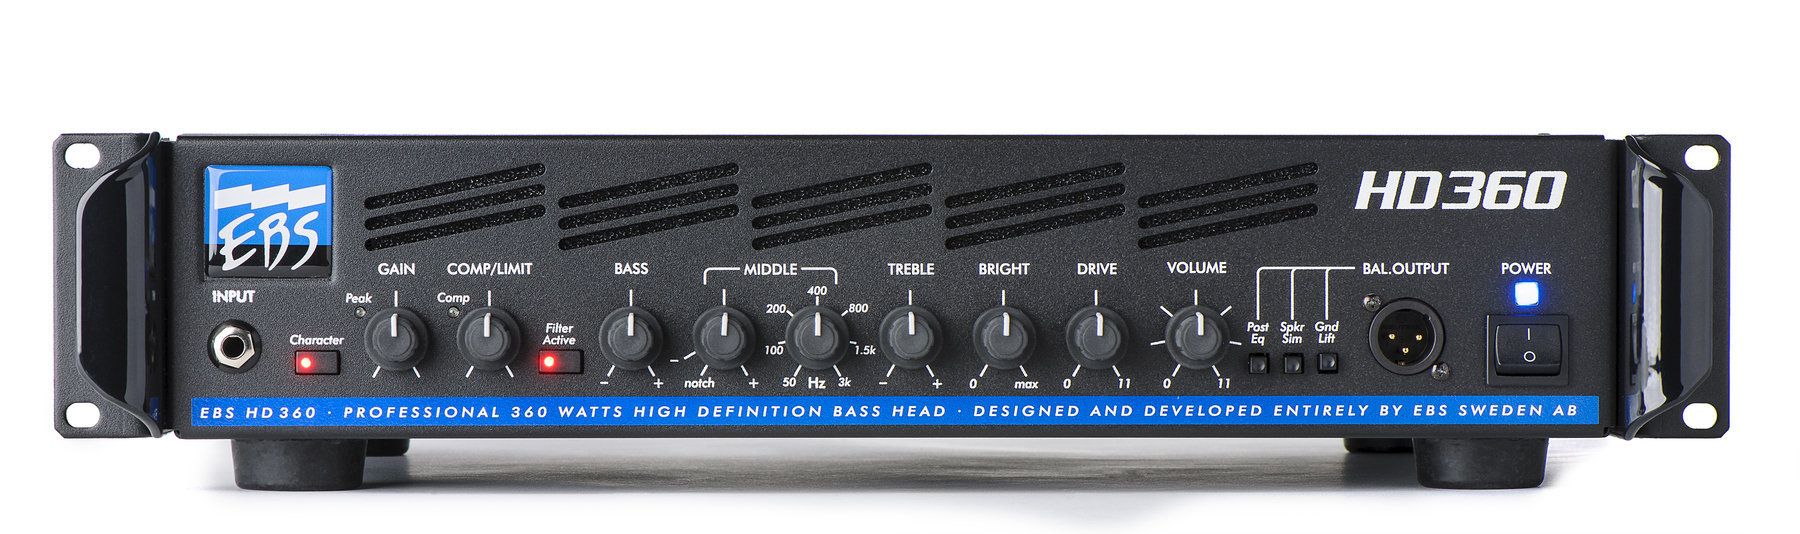 Solid-State Bass Amplifier EBS HD360